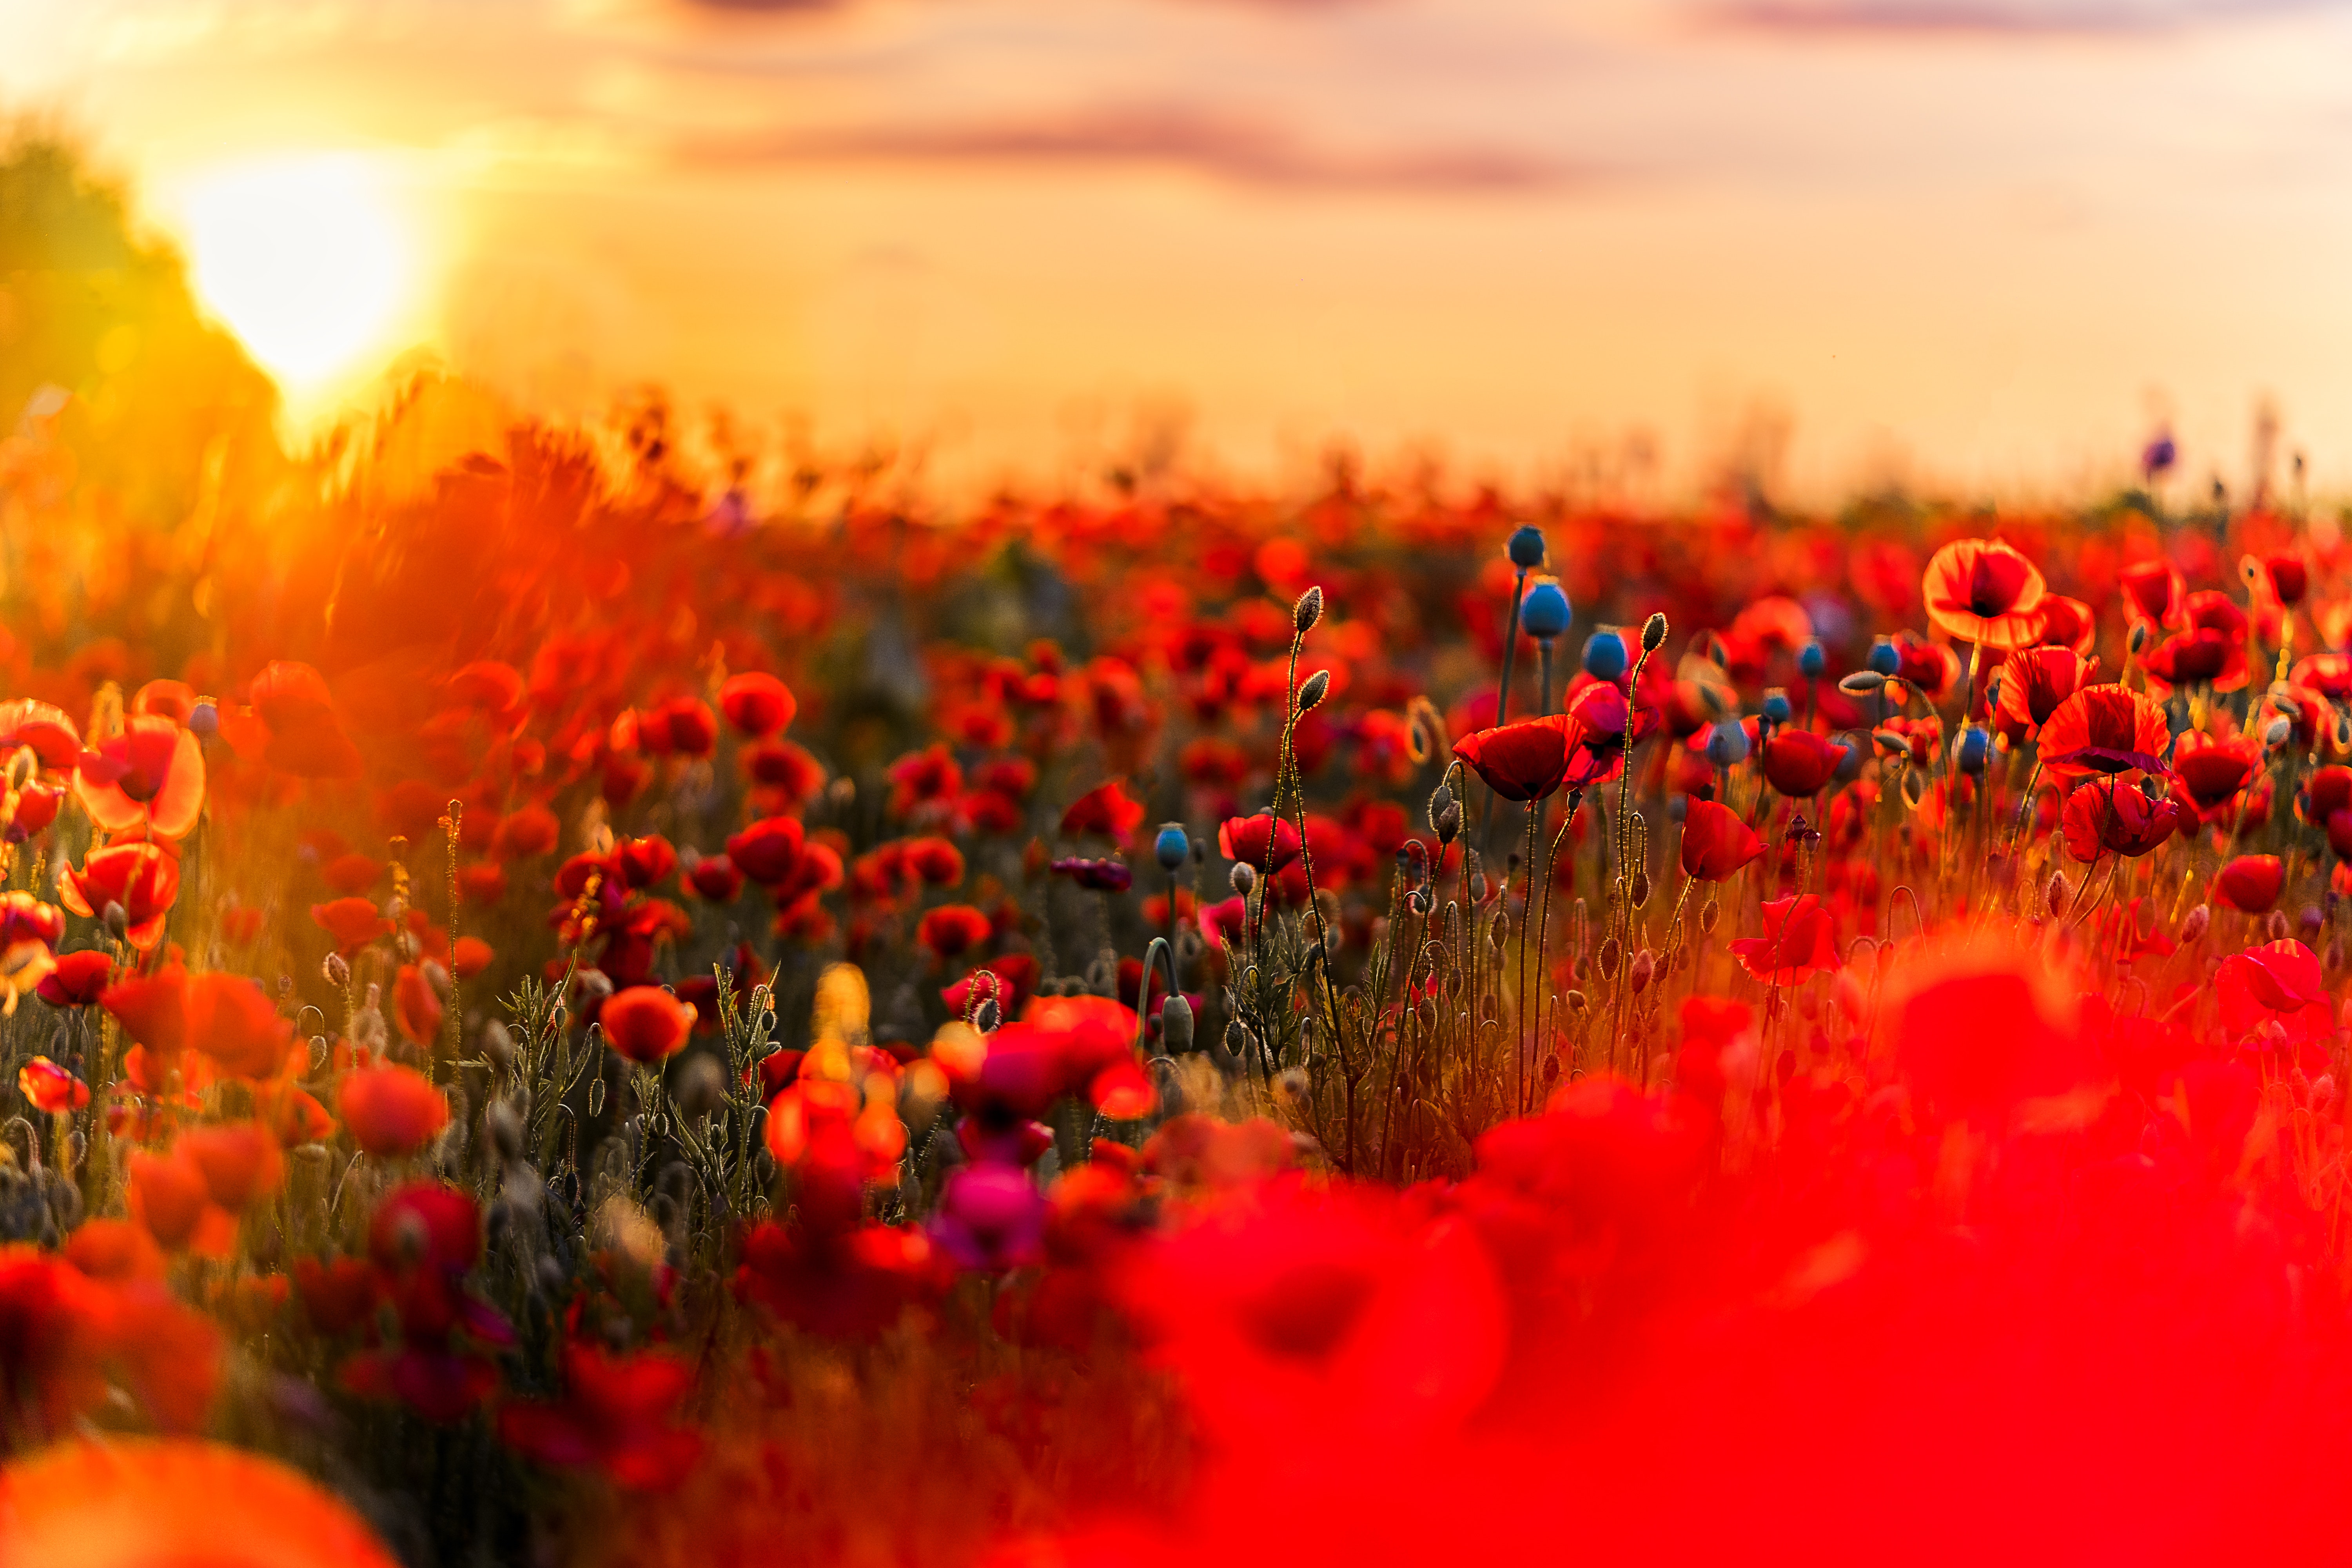 Red poppies blooming in the sunset